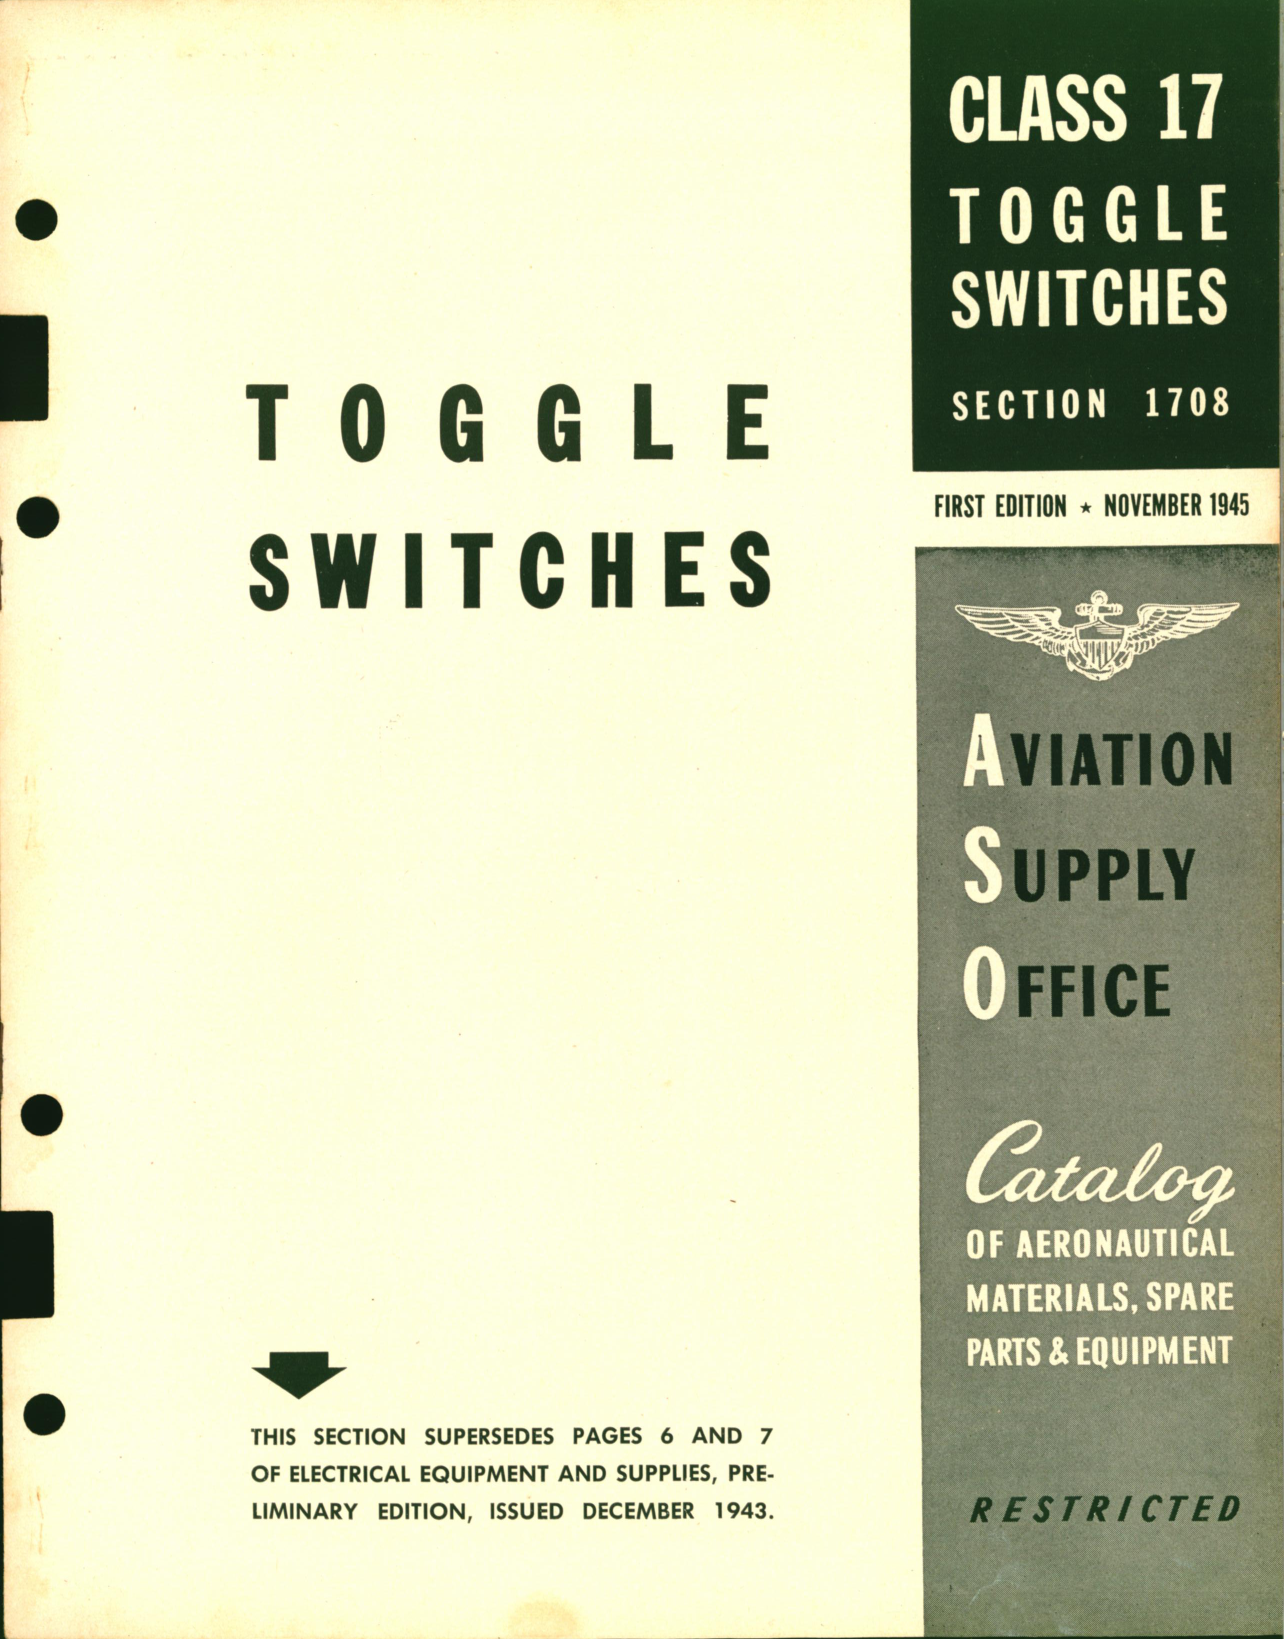 Sample page 1 from AirCorps Library document: Toggle Switches